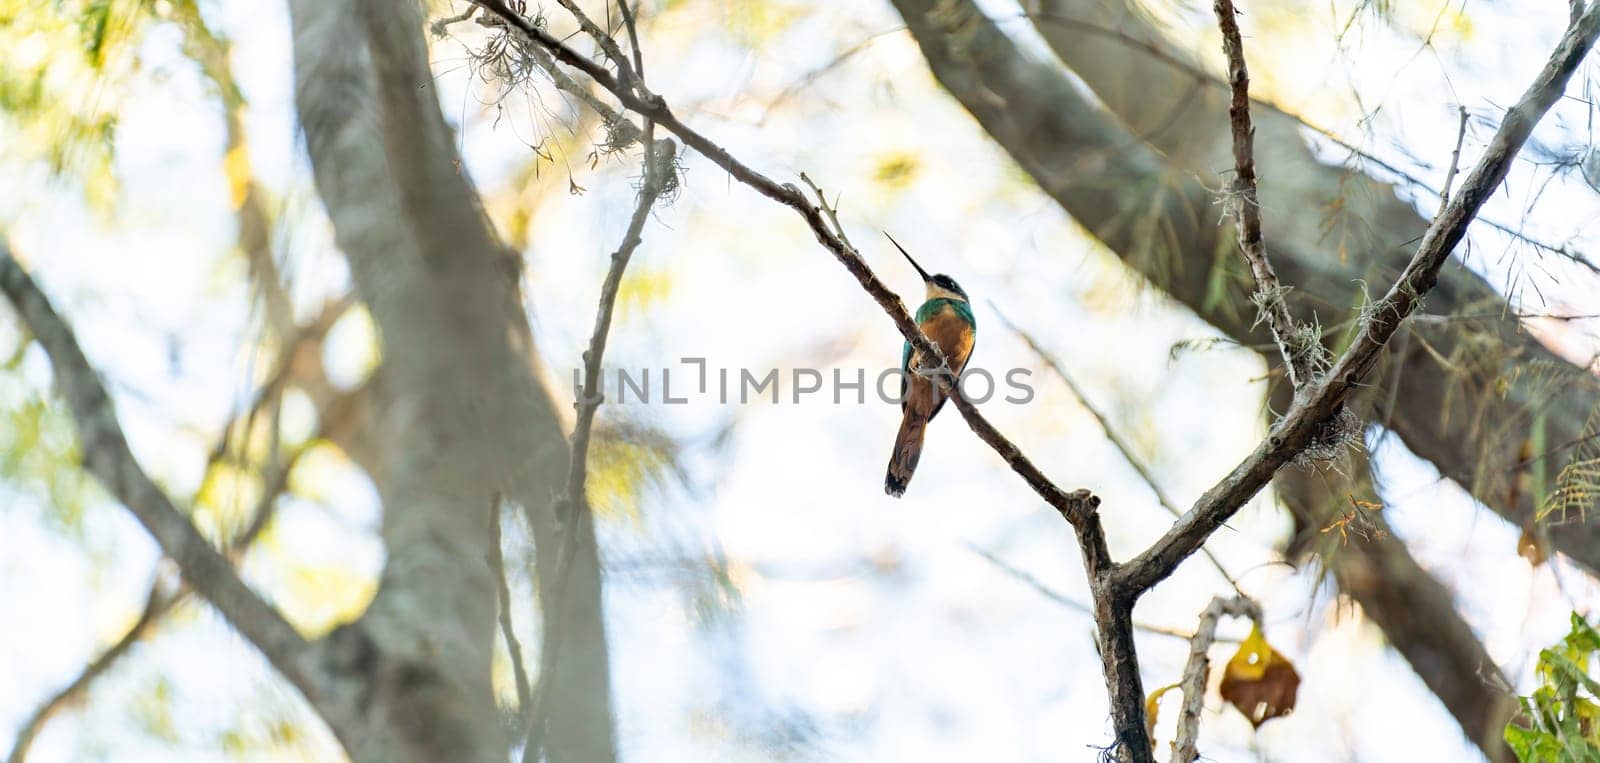 A colorful bird perches on a branch, bathed in gentle light through foliage.